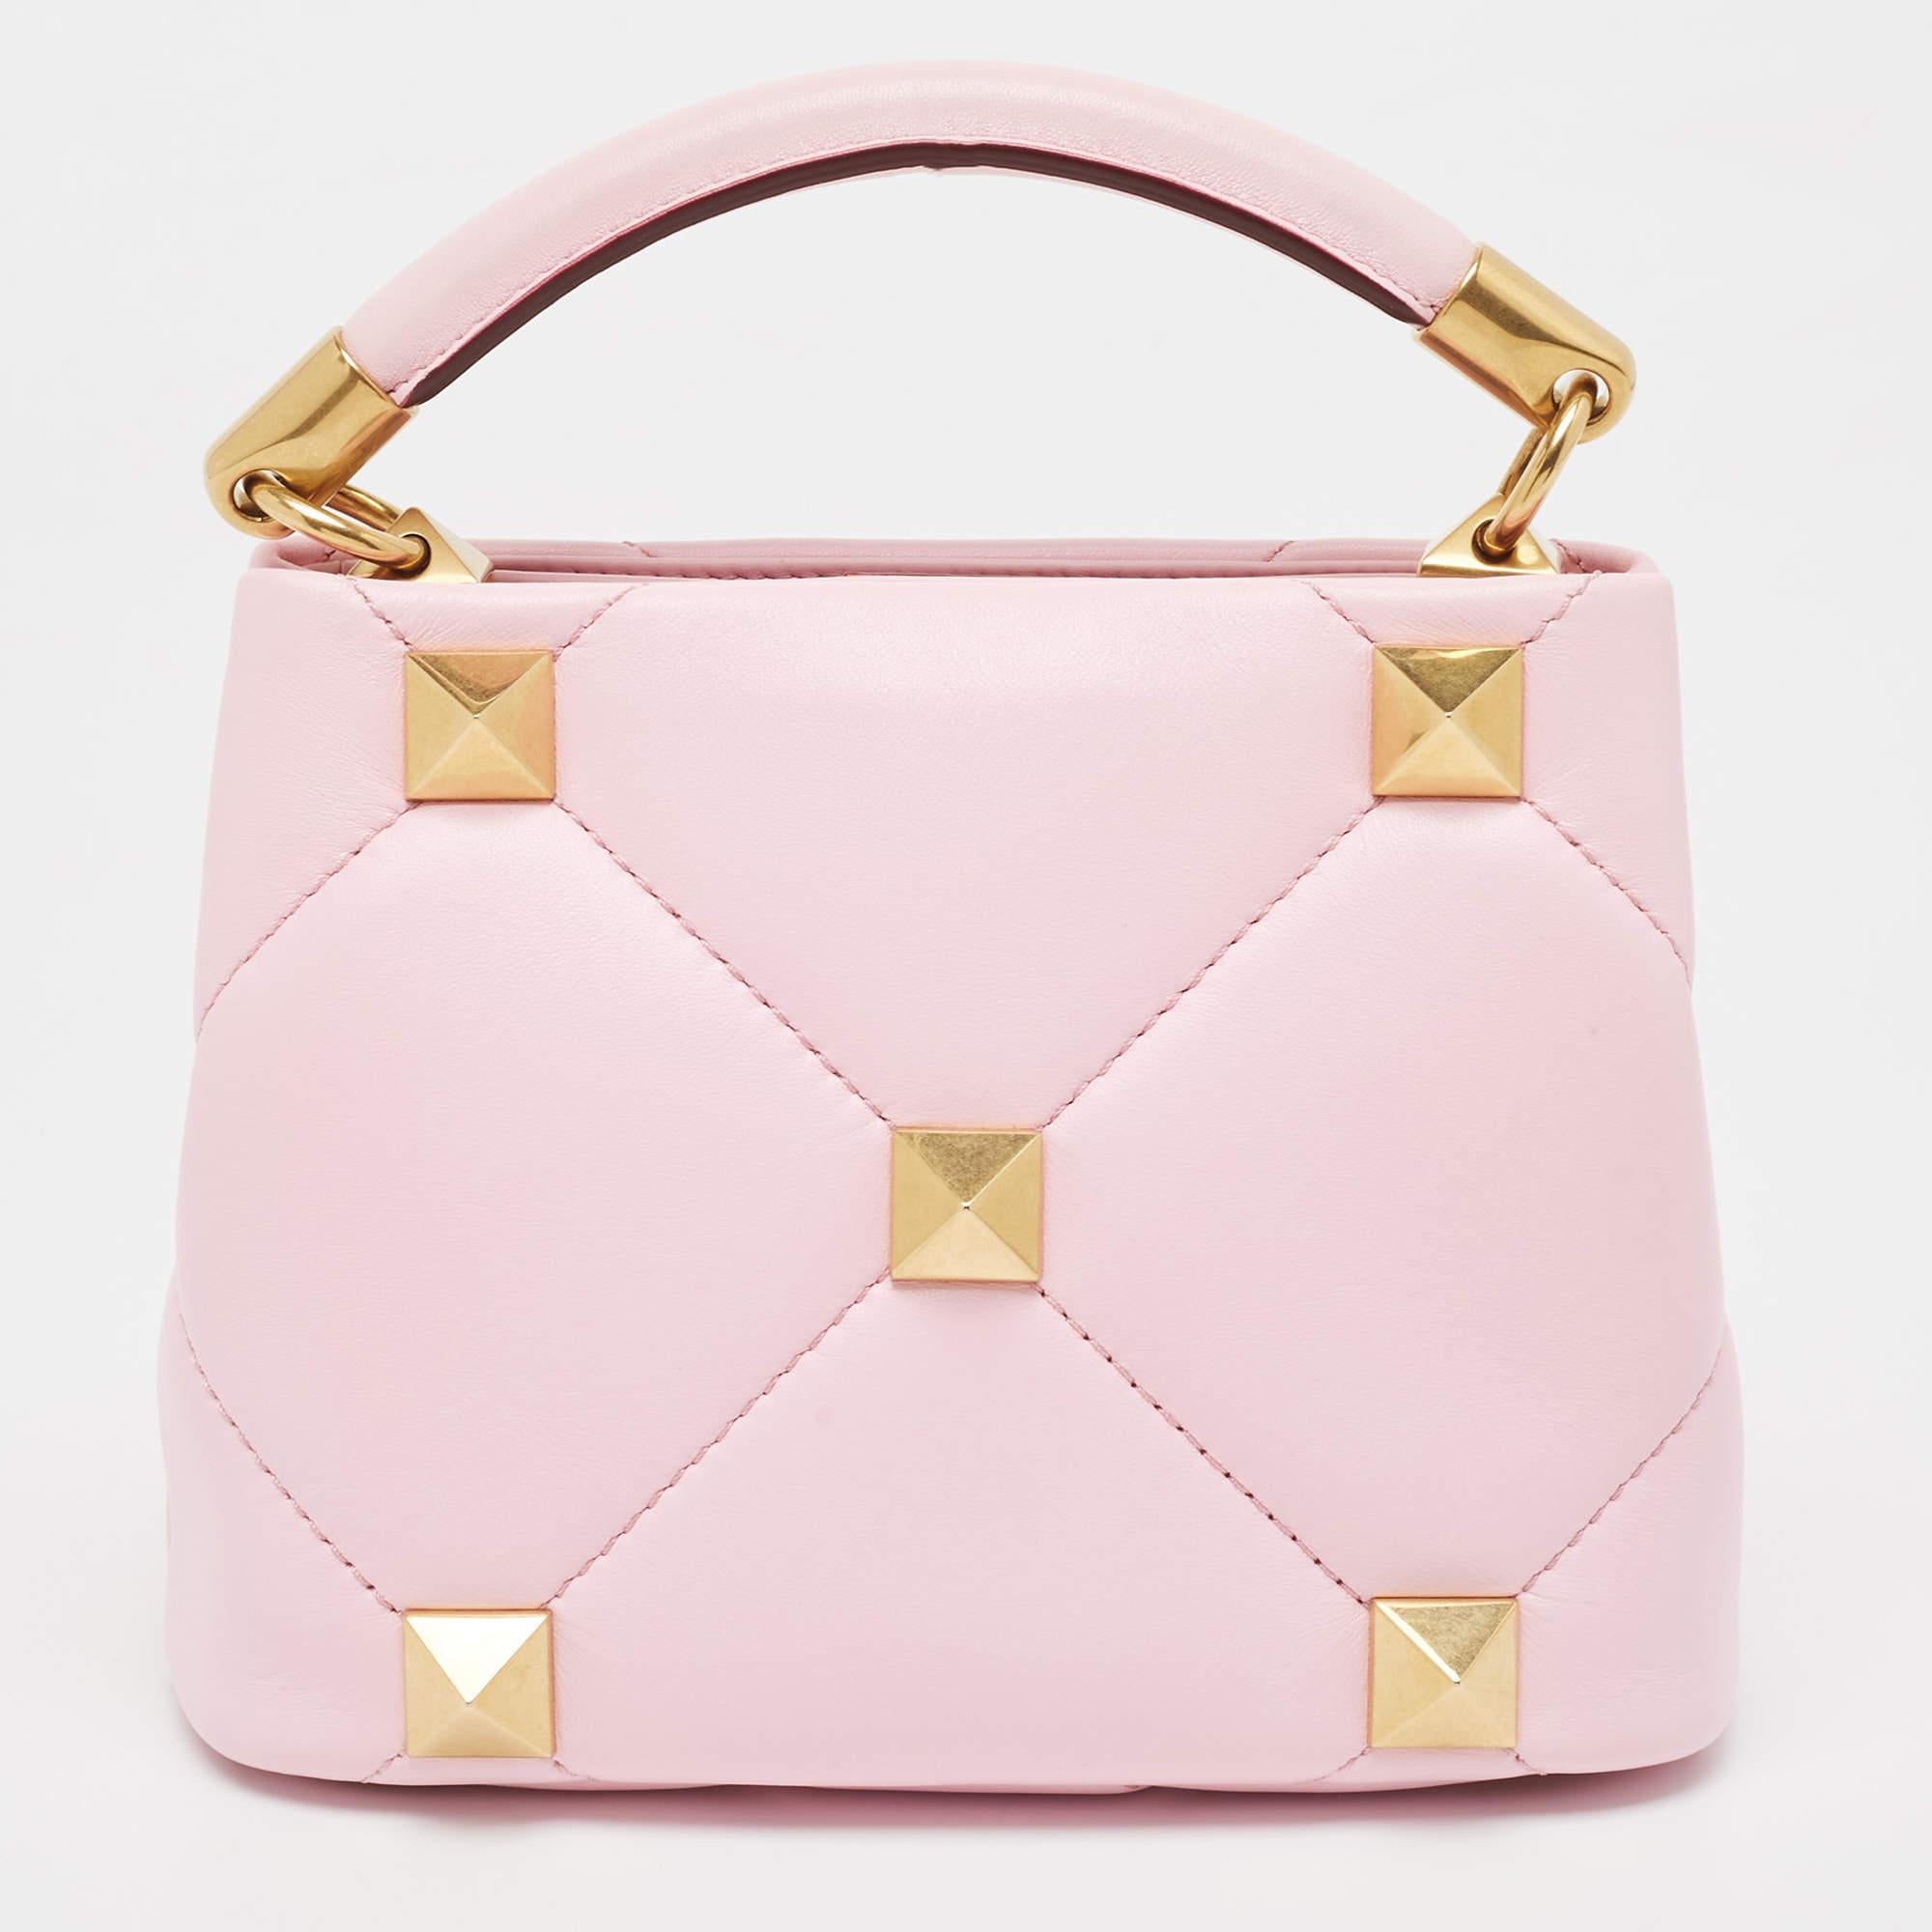 The Valentino handbag is a luxurious accessory crafted with precision. Made from high-quality materials, it features a timeless design with meticulous stitching, signature details, and shiny hardware. Well-spaced and stylish, it exudes elegance and